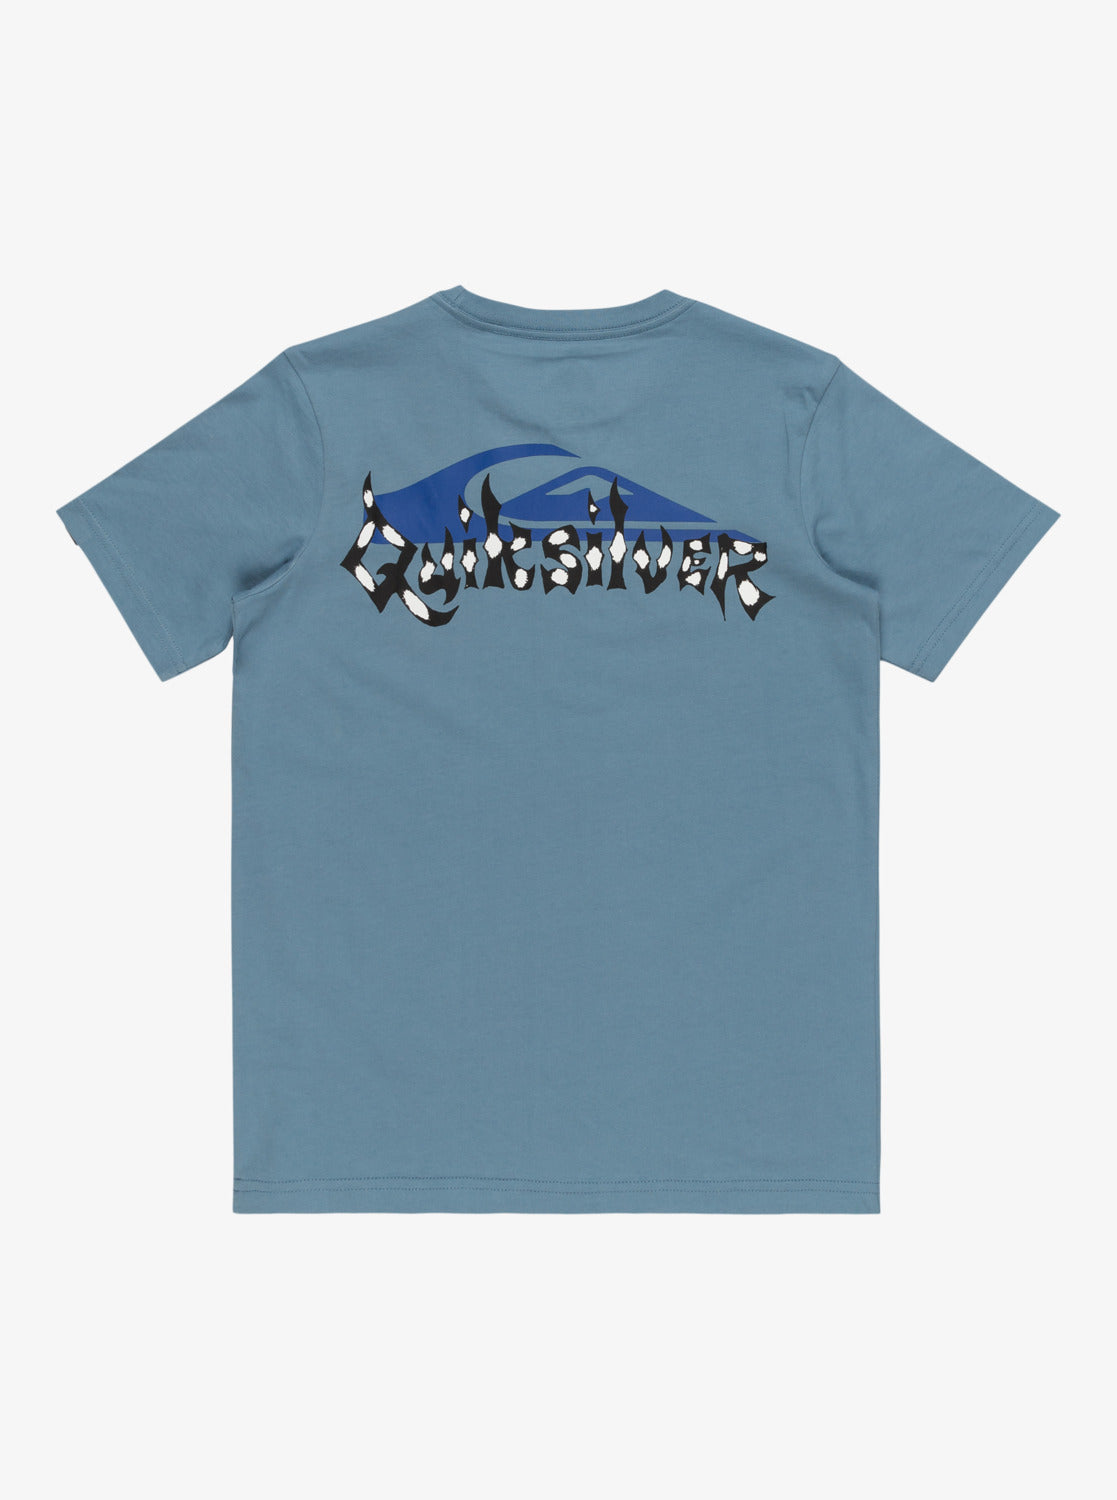 Quiksilver Surf Core Boys T-Shirt in Blue Shadow